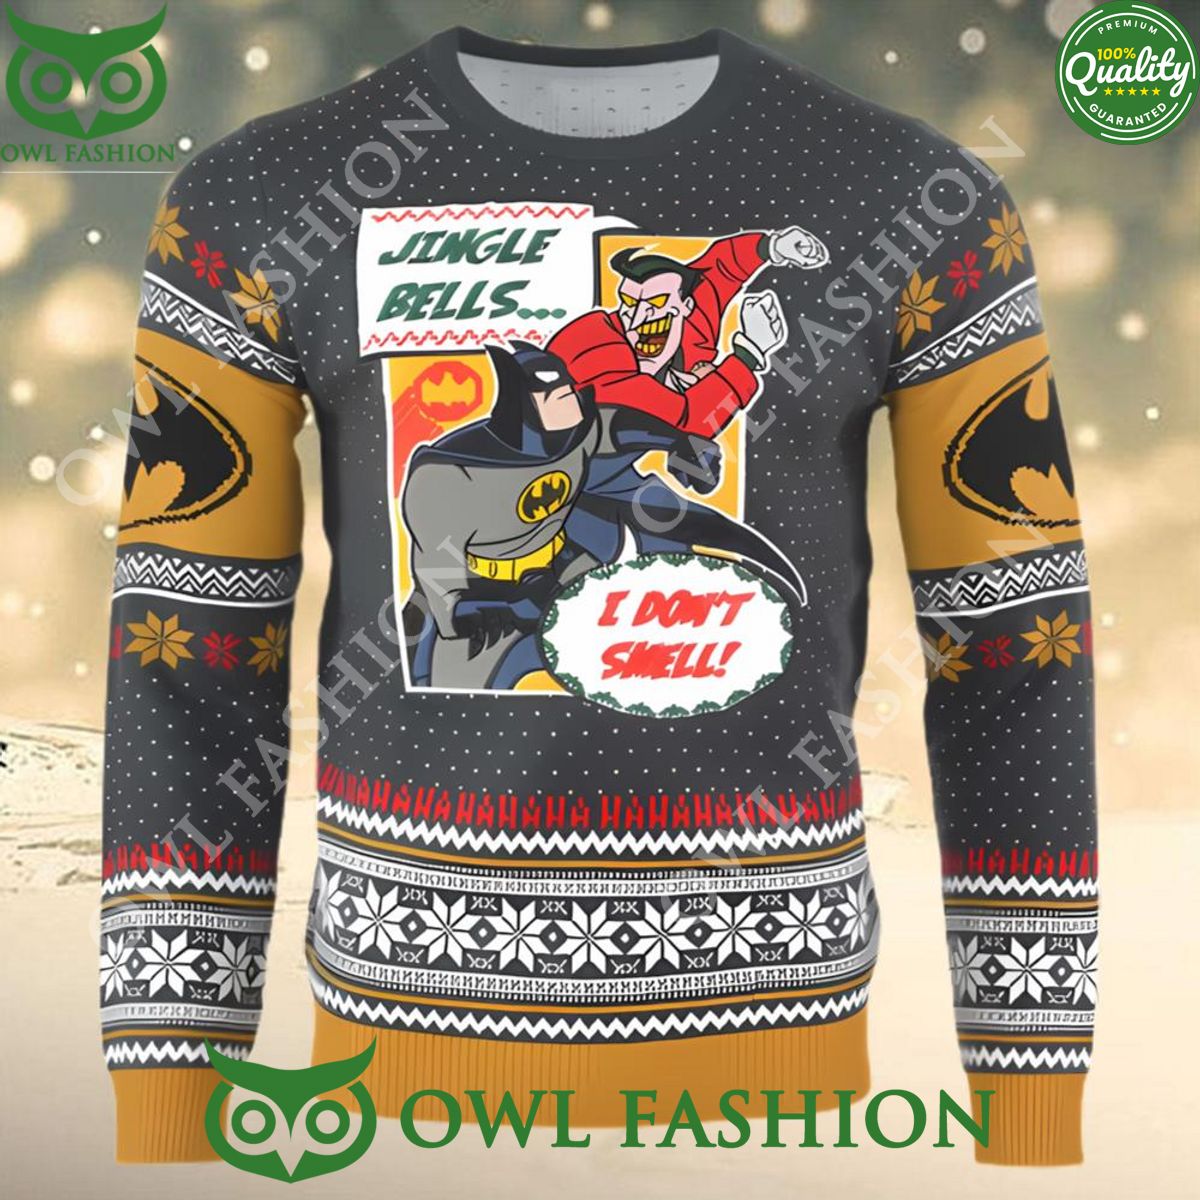 Batman ‘I Don’t Smell’ Christmas Ugly Sweater Jumper Looking so nice